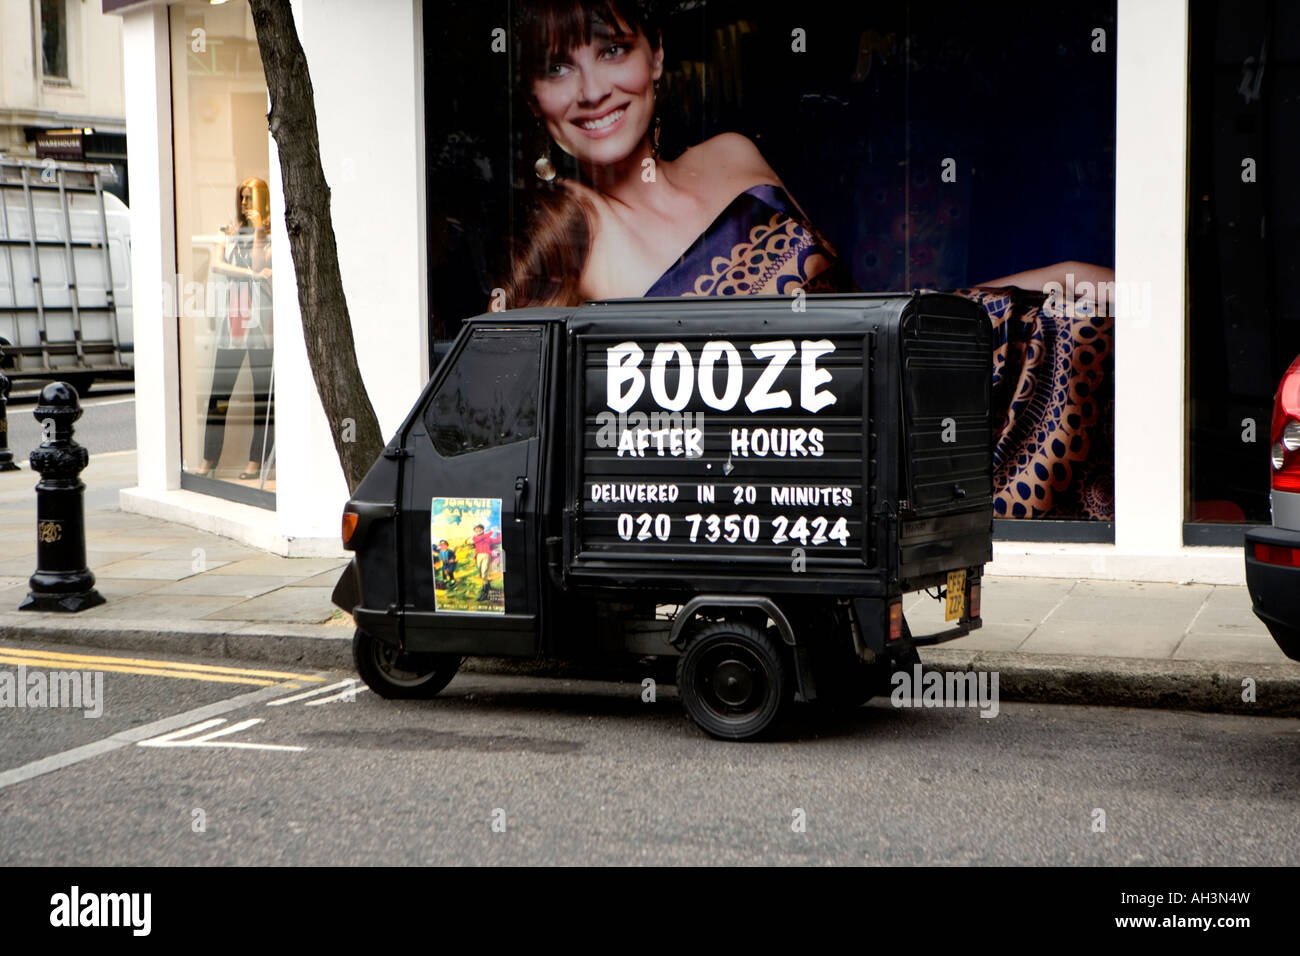 After hours booze deliveries Street scene just off "King's Road" London Stock Photo